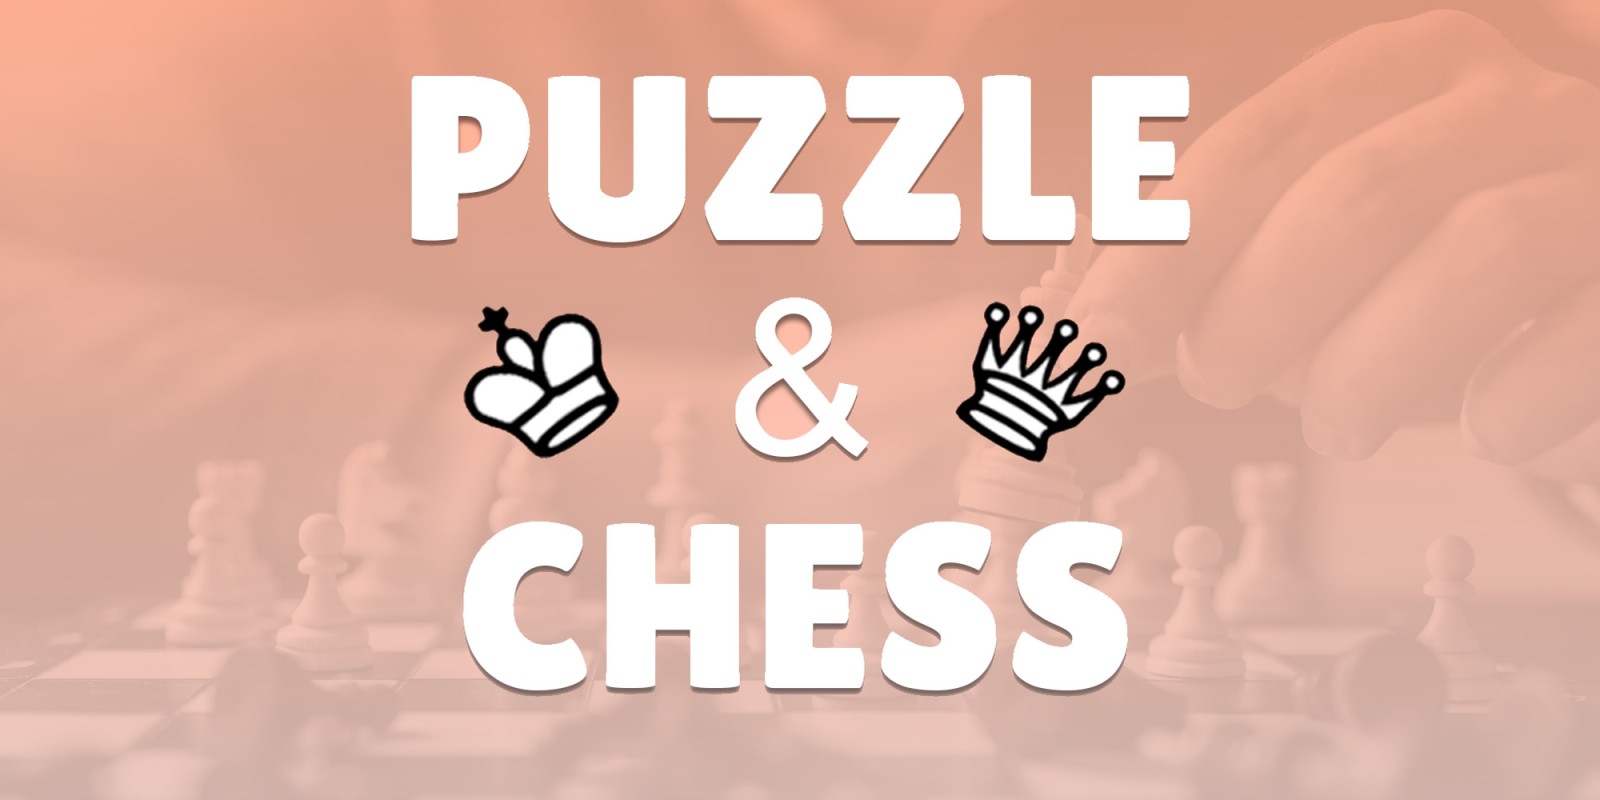 Puzzle & Chess